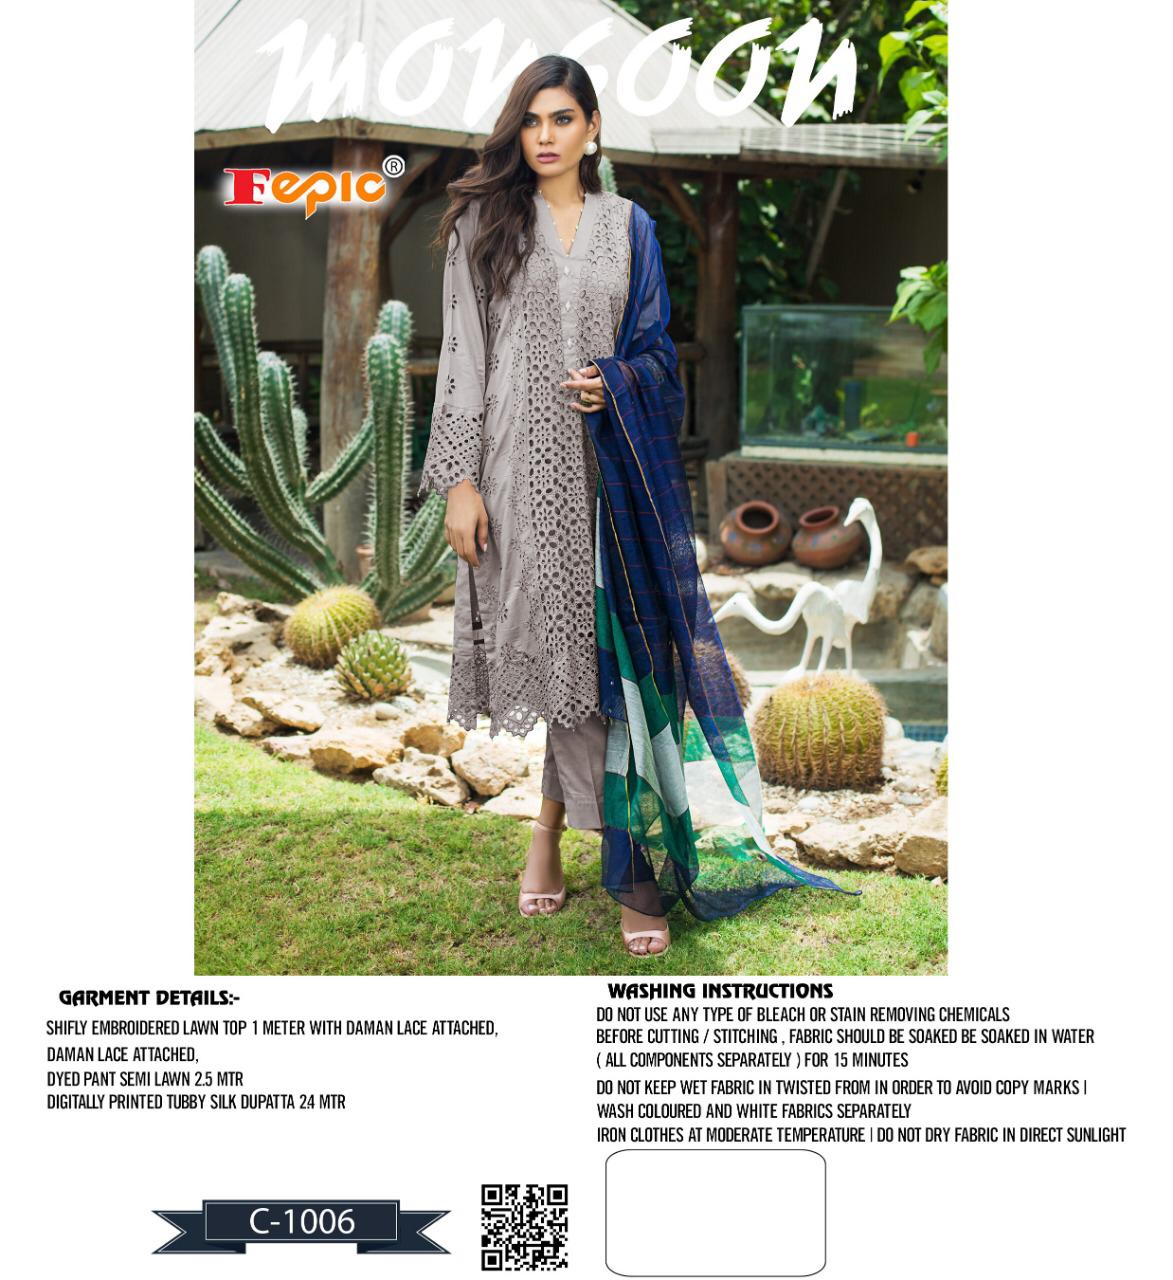 Fepic rosemeen monsoon pakistani concept dress Material collection